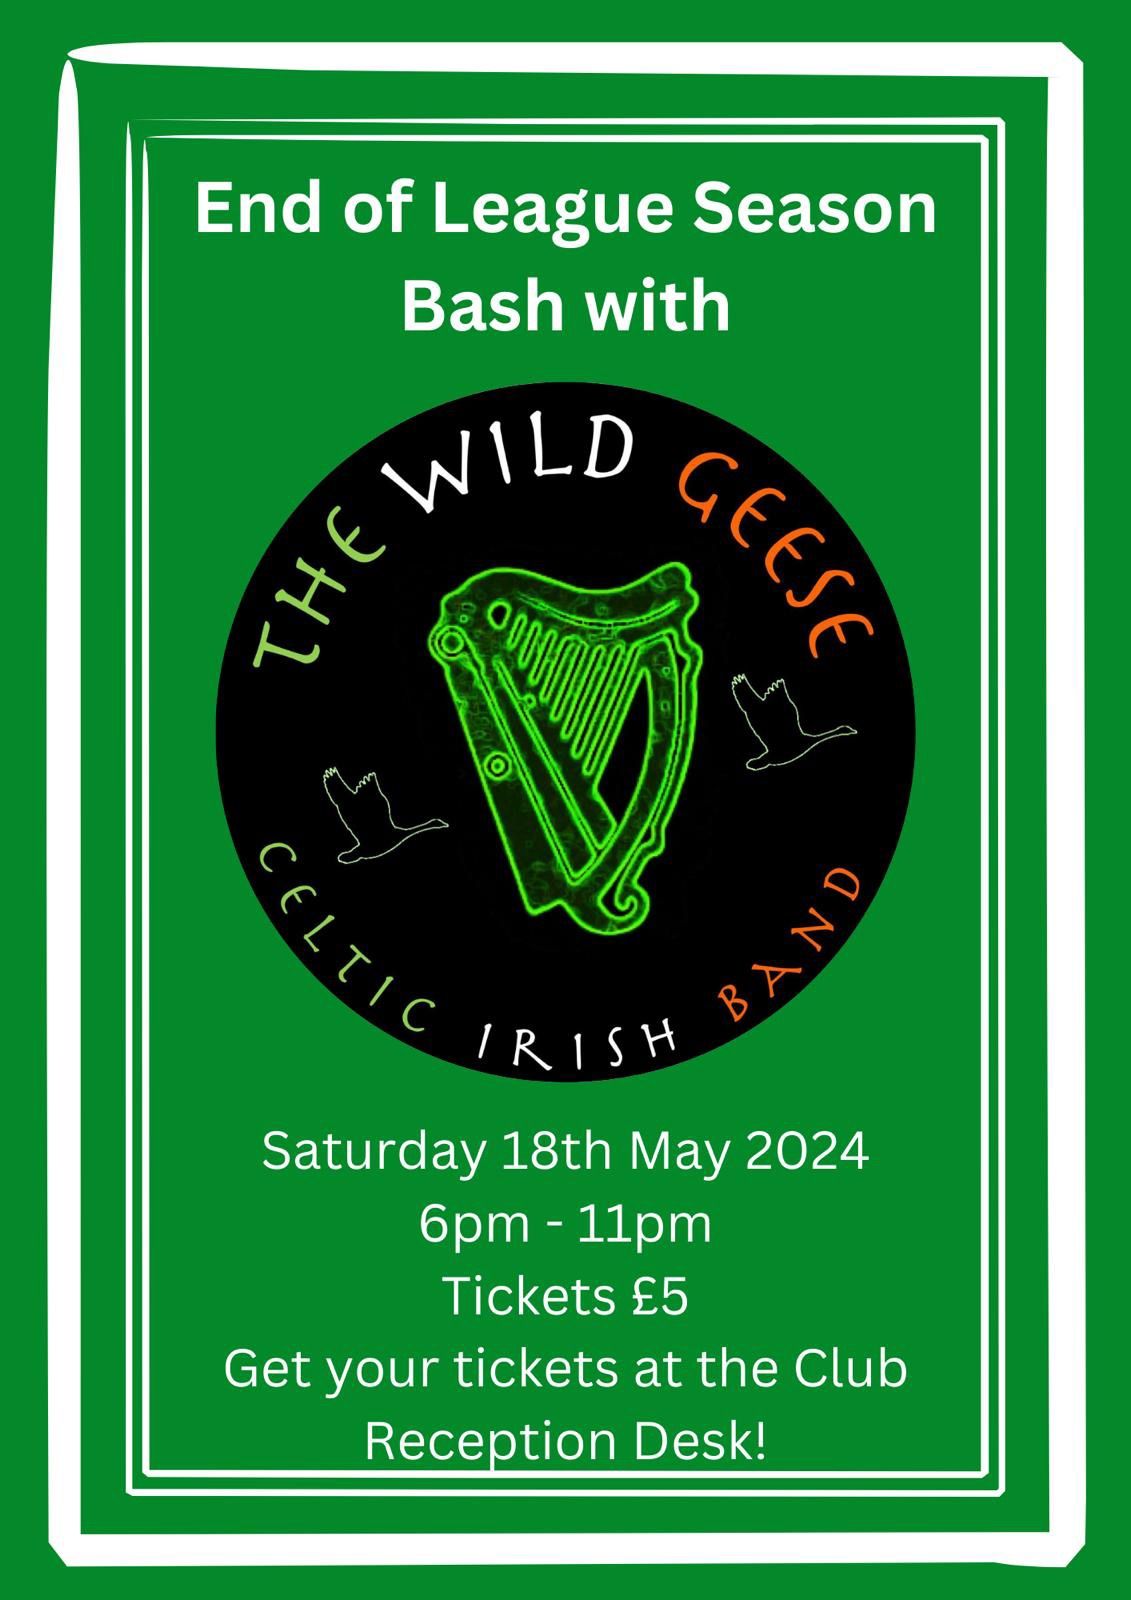 End of League Season Bash with The Wild Geese